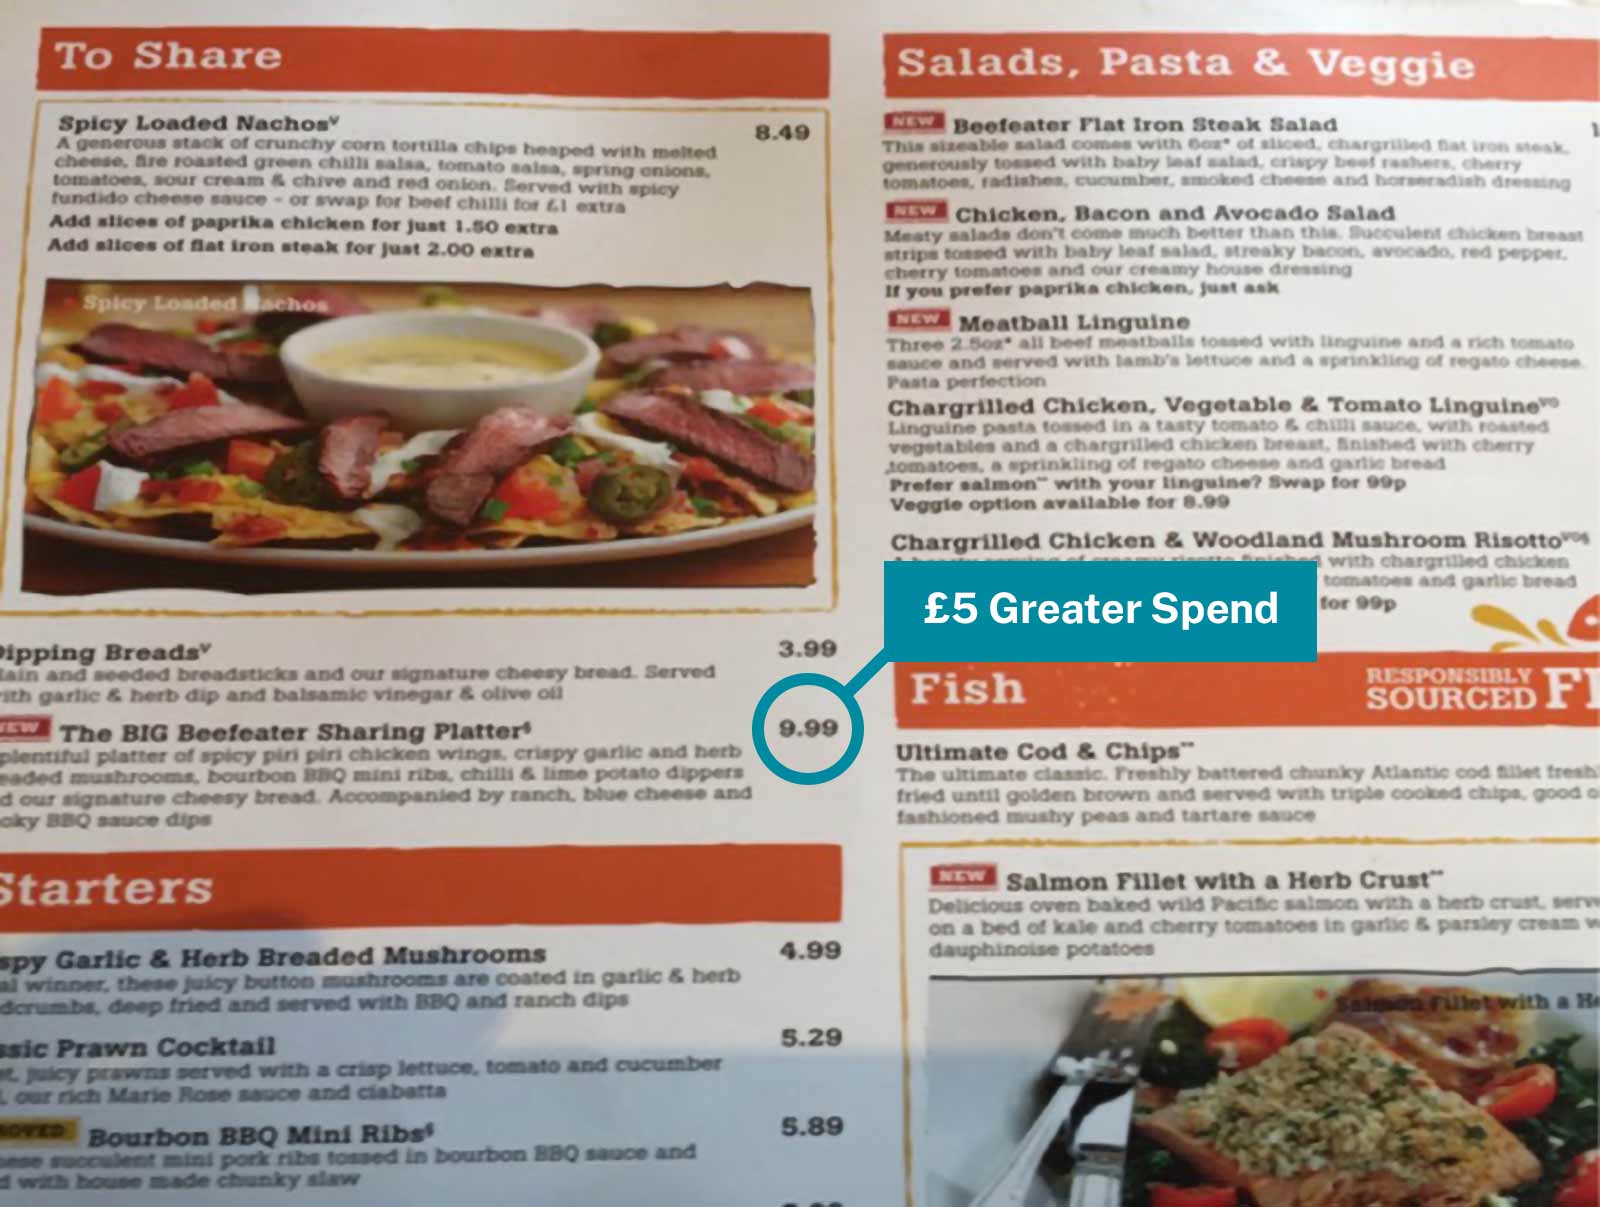 Menu indicating prices using decimal points to get a £5 greater spend.